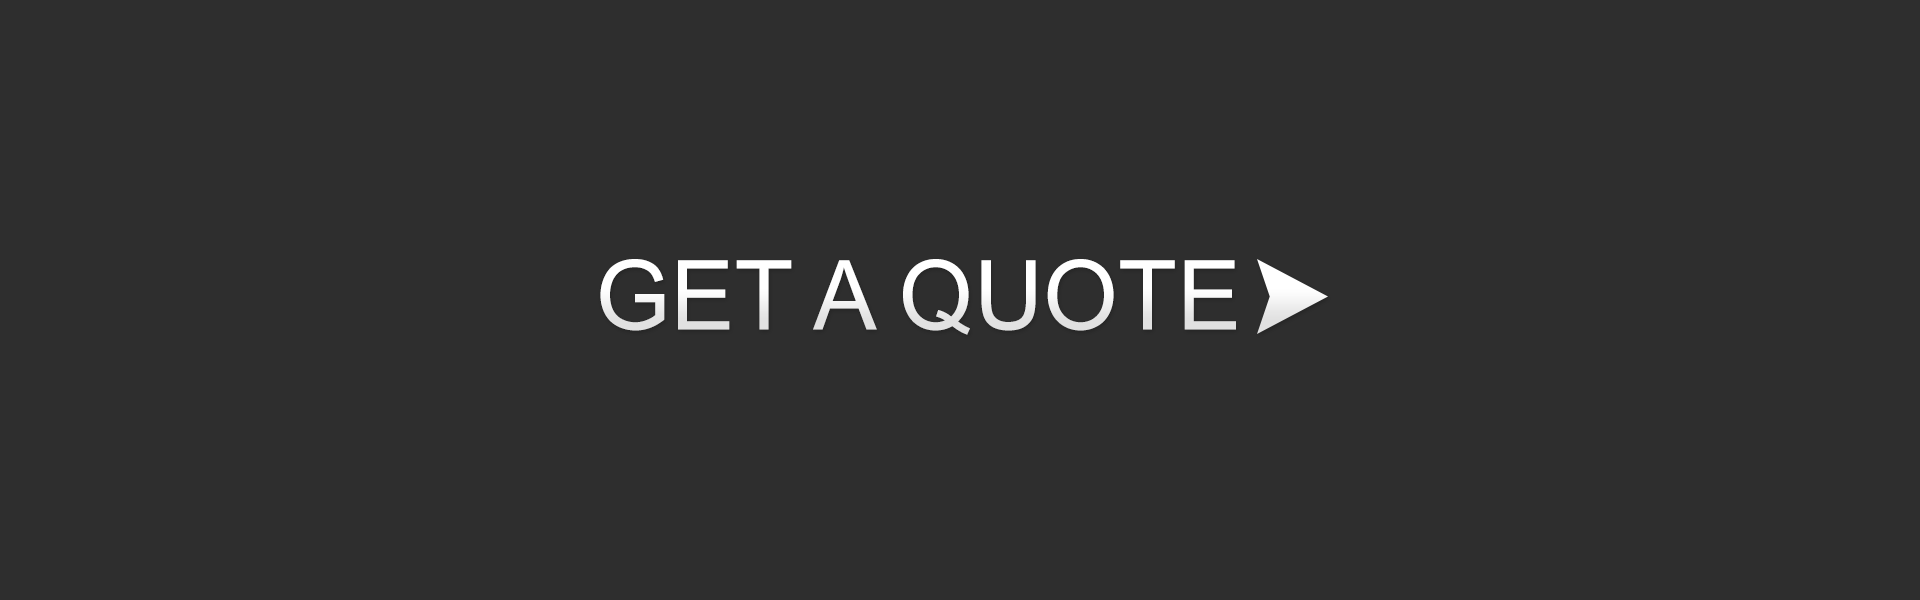 get-a-quote-LARGE